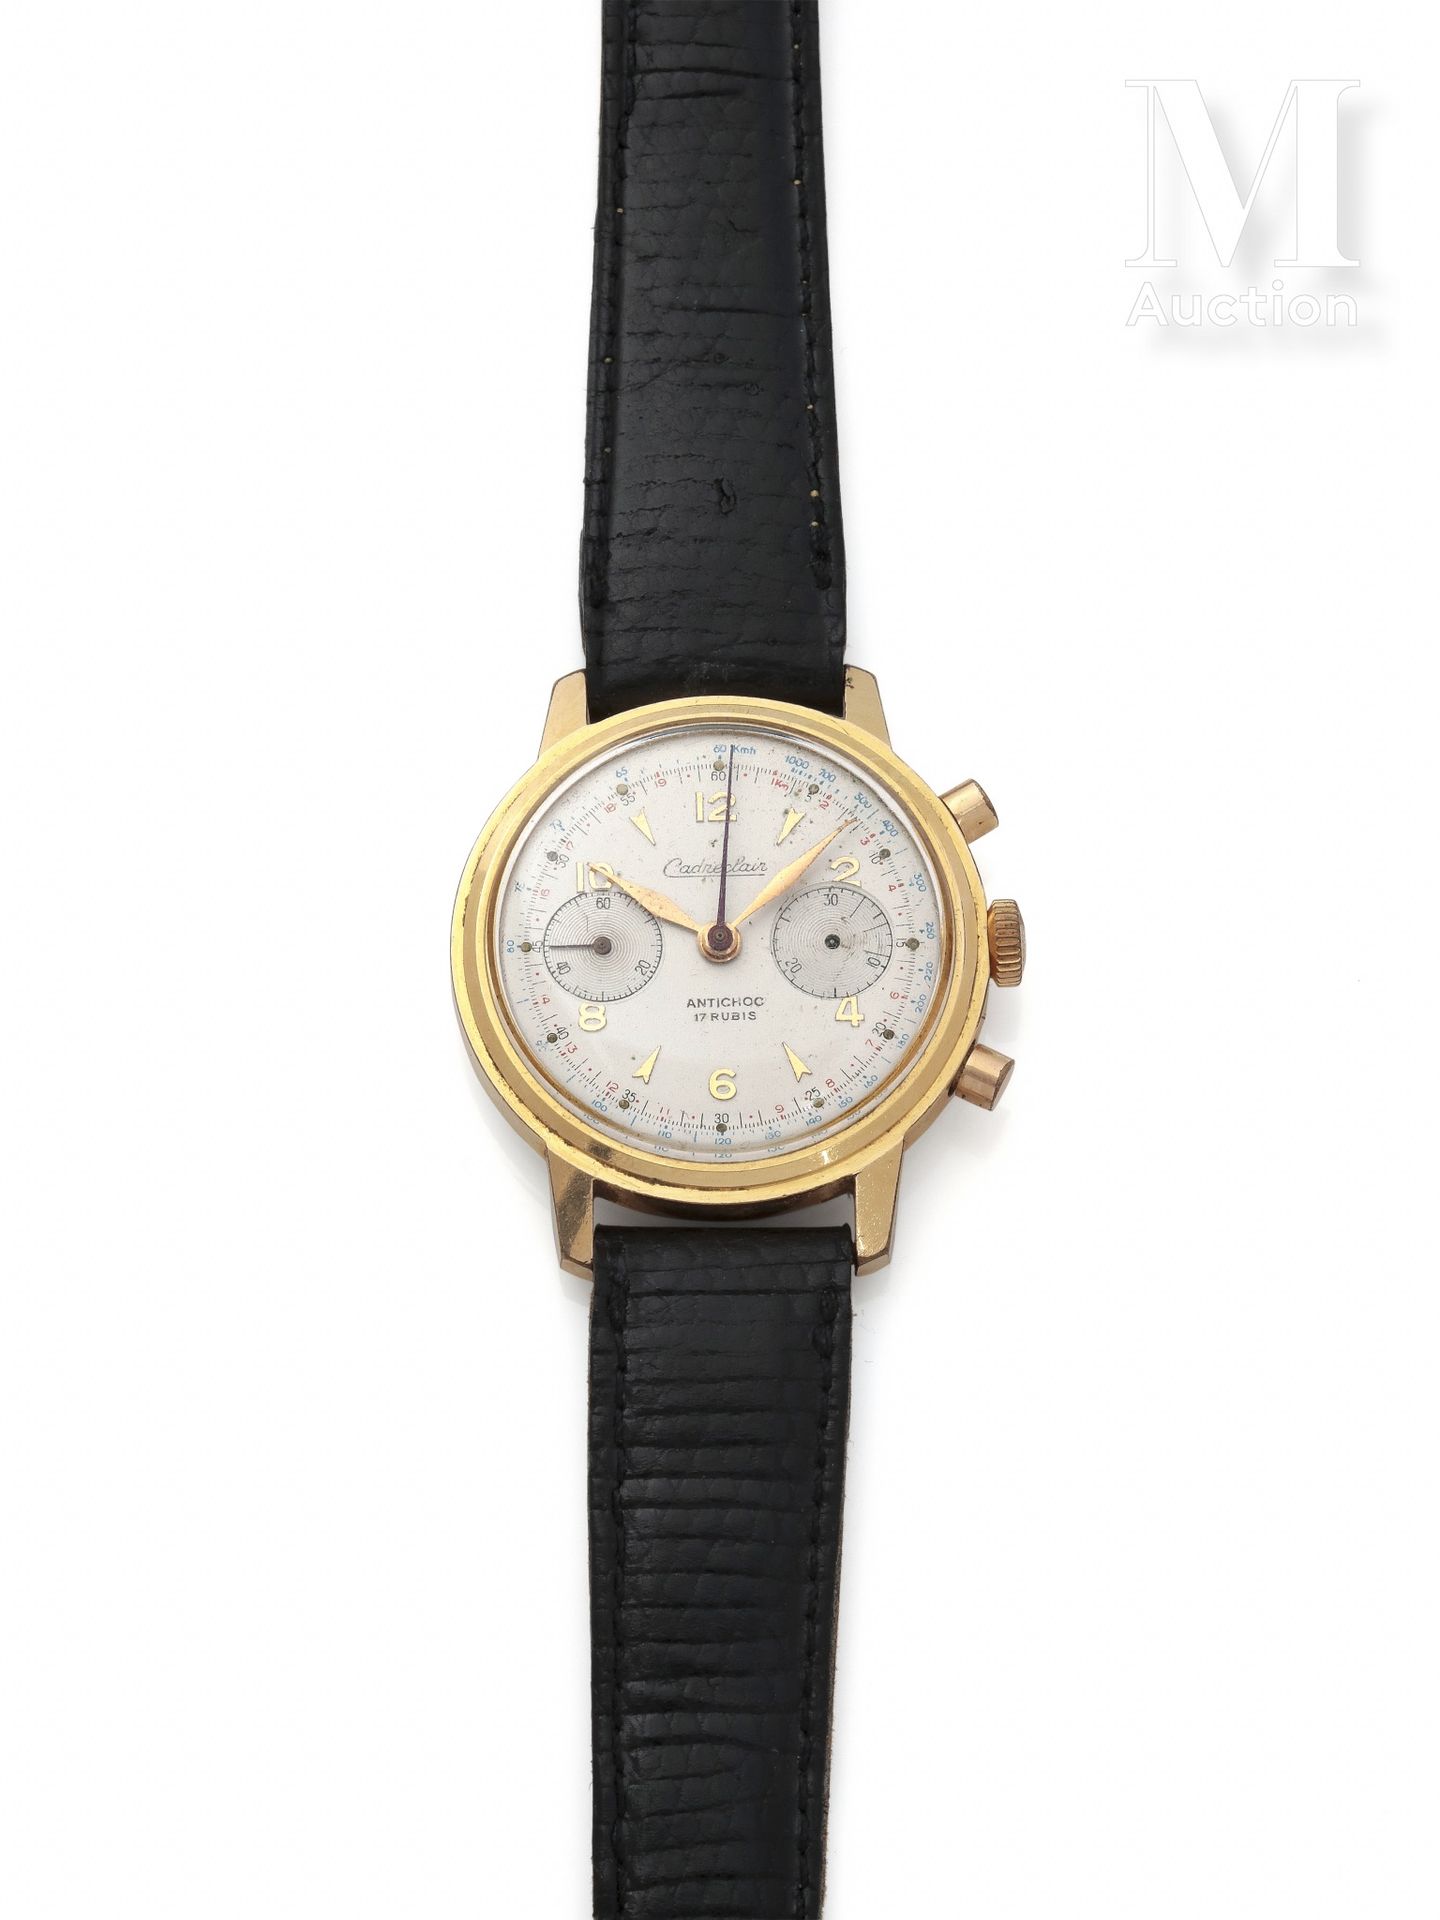 Cadreclair Men's chronograph watch

Circa 1960

Gold-plated case 

Hand-wound me&hellip;